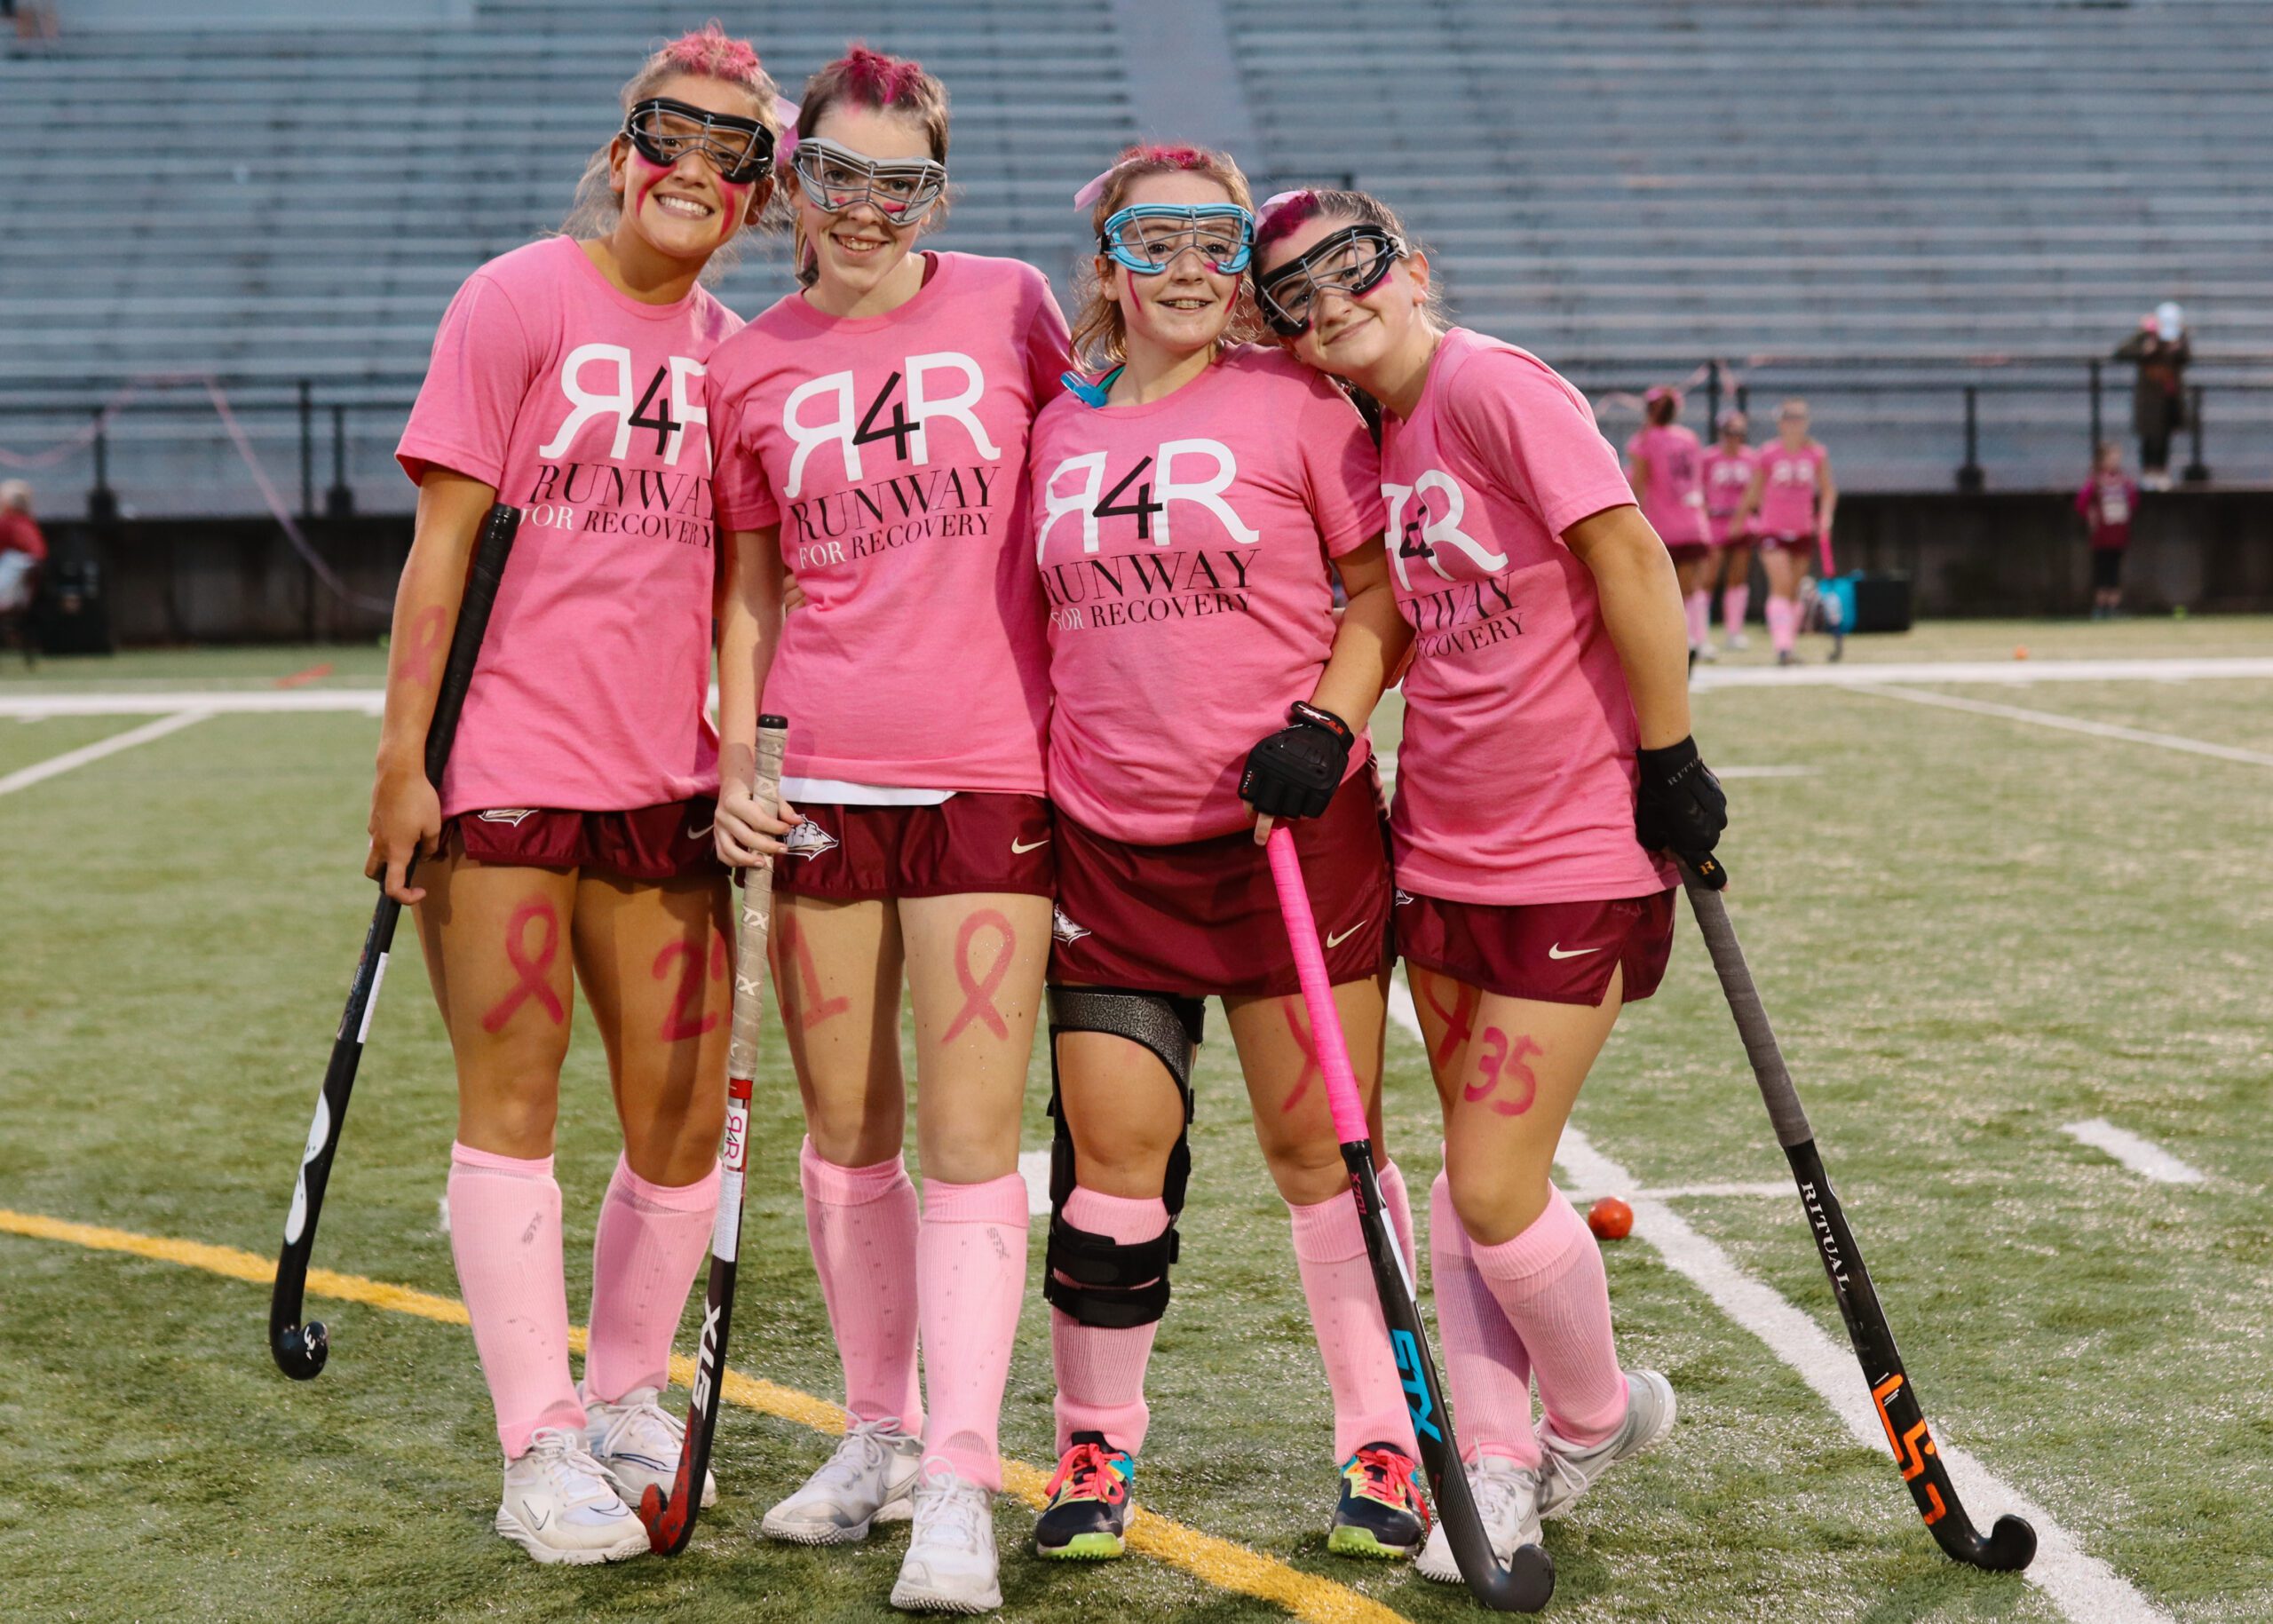 Four high school field hockey players posing in pink gear for a breast cancer awareness game.